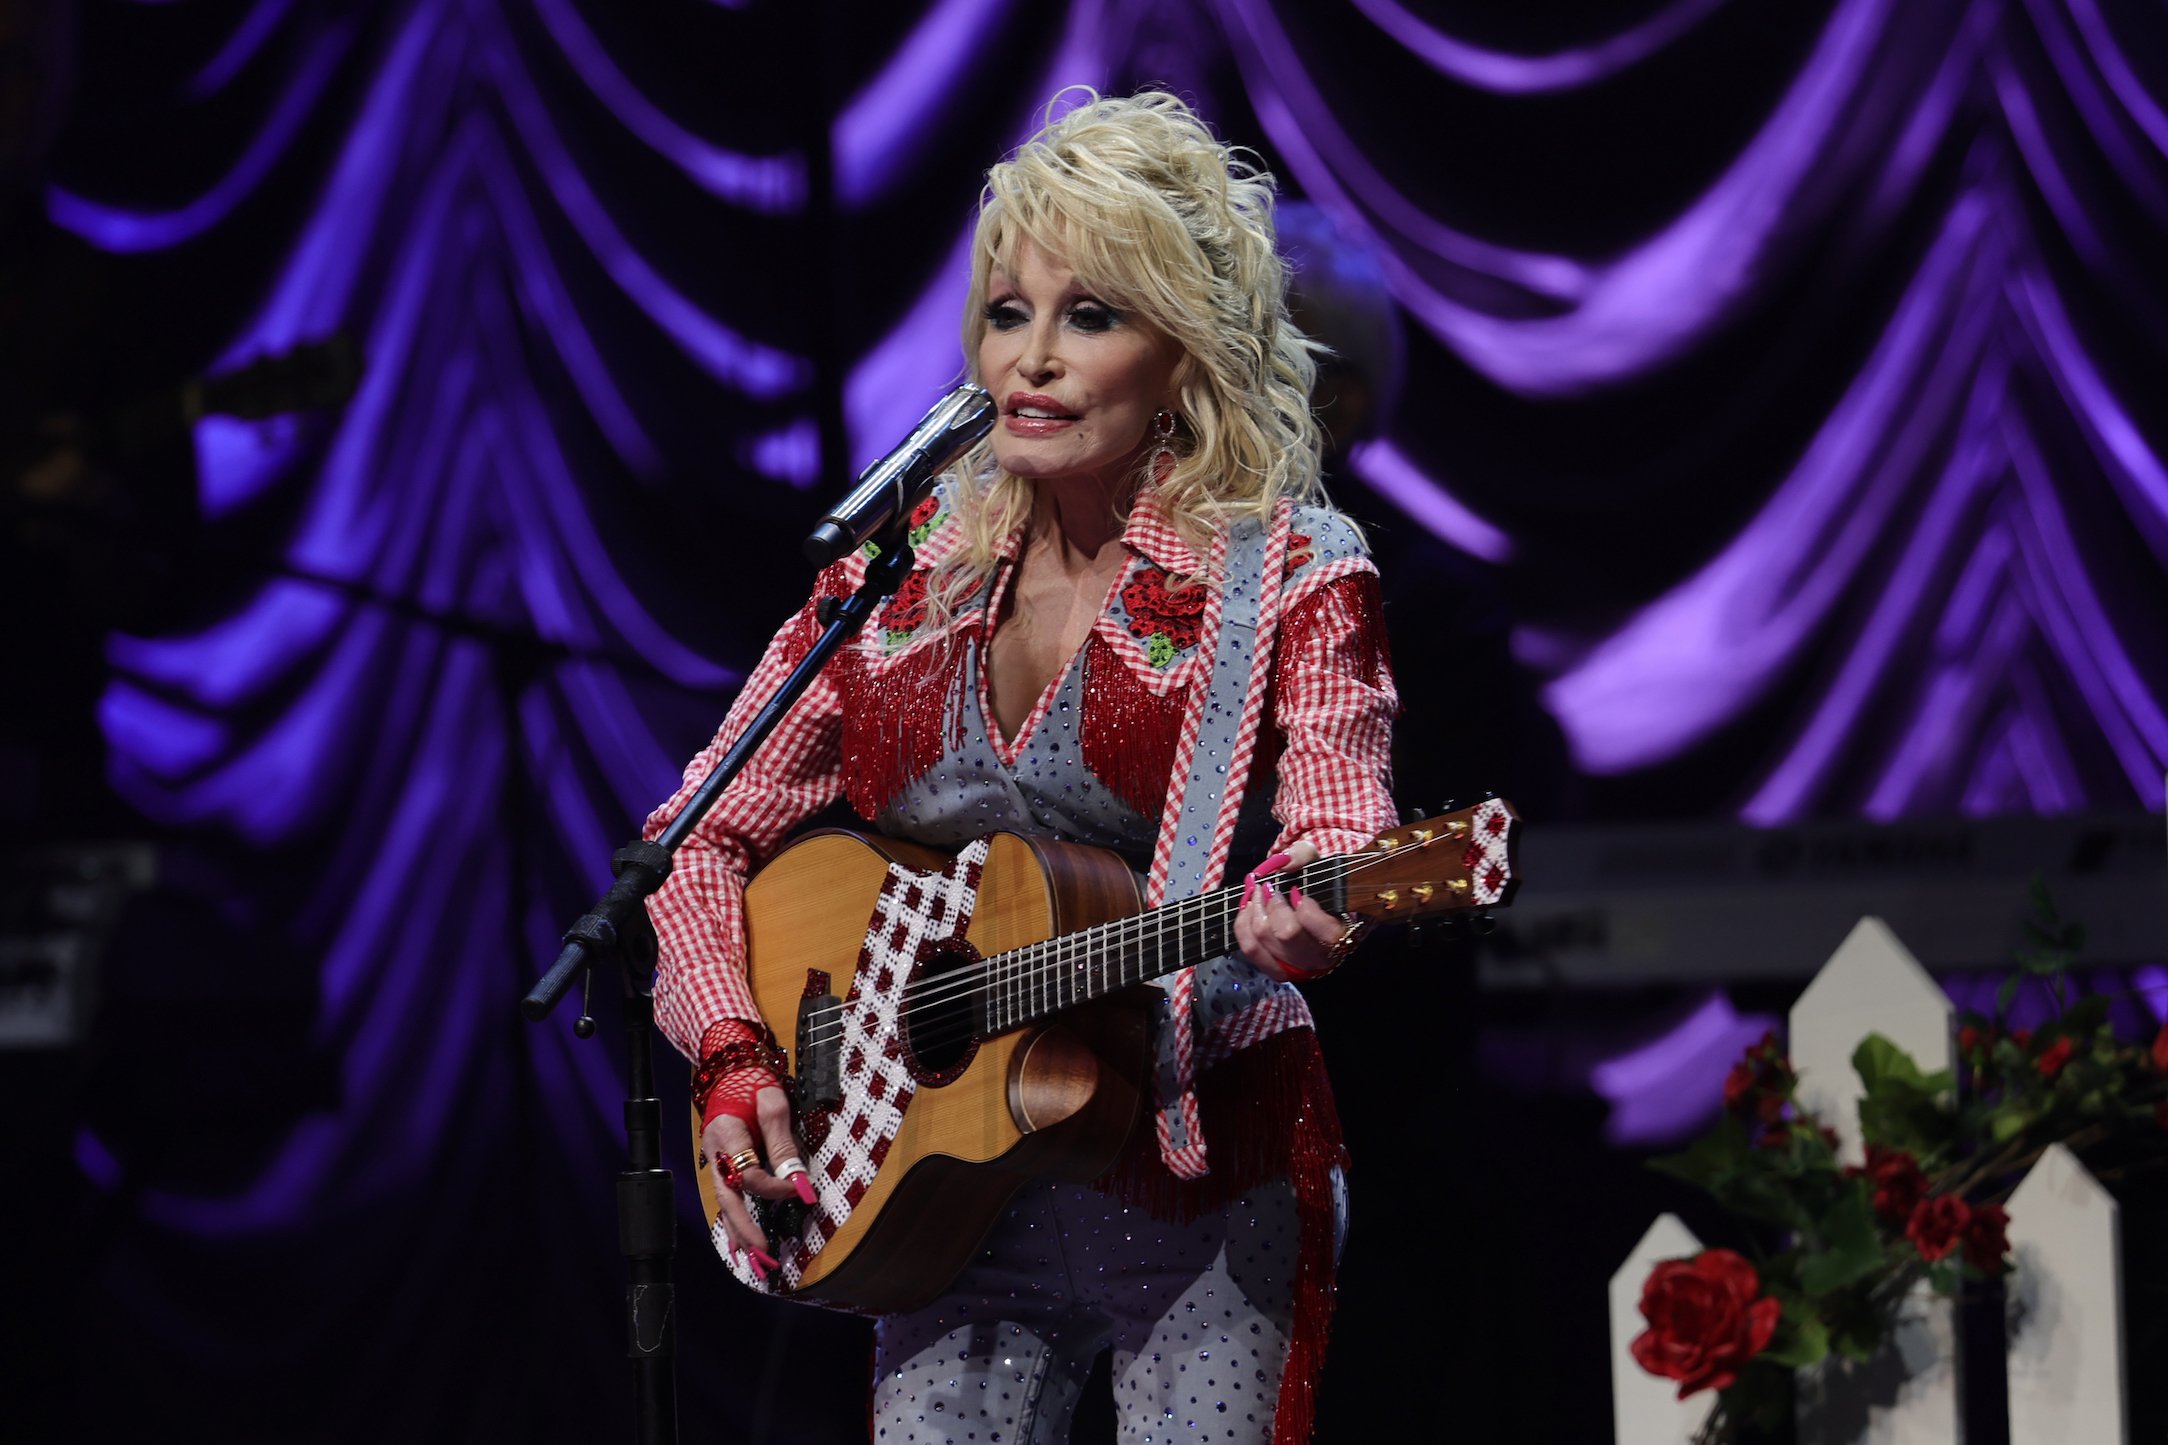 Dolly Parton performs on stage during the 2022 SXSW conference